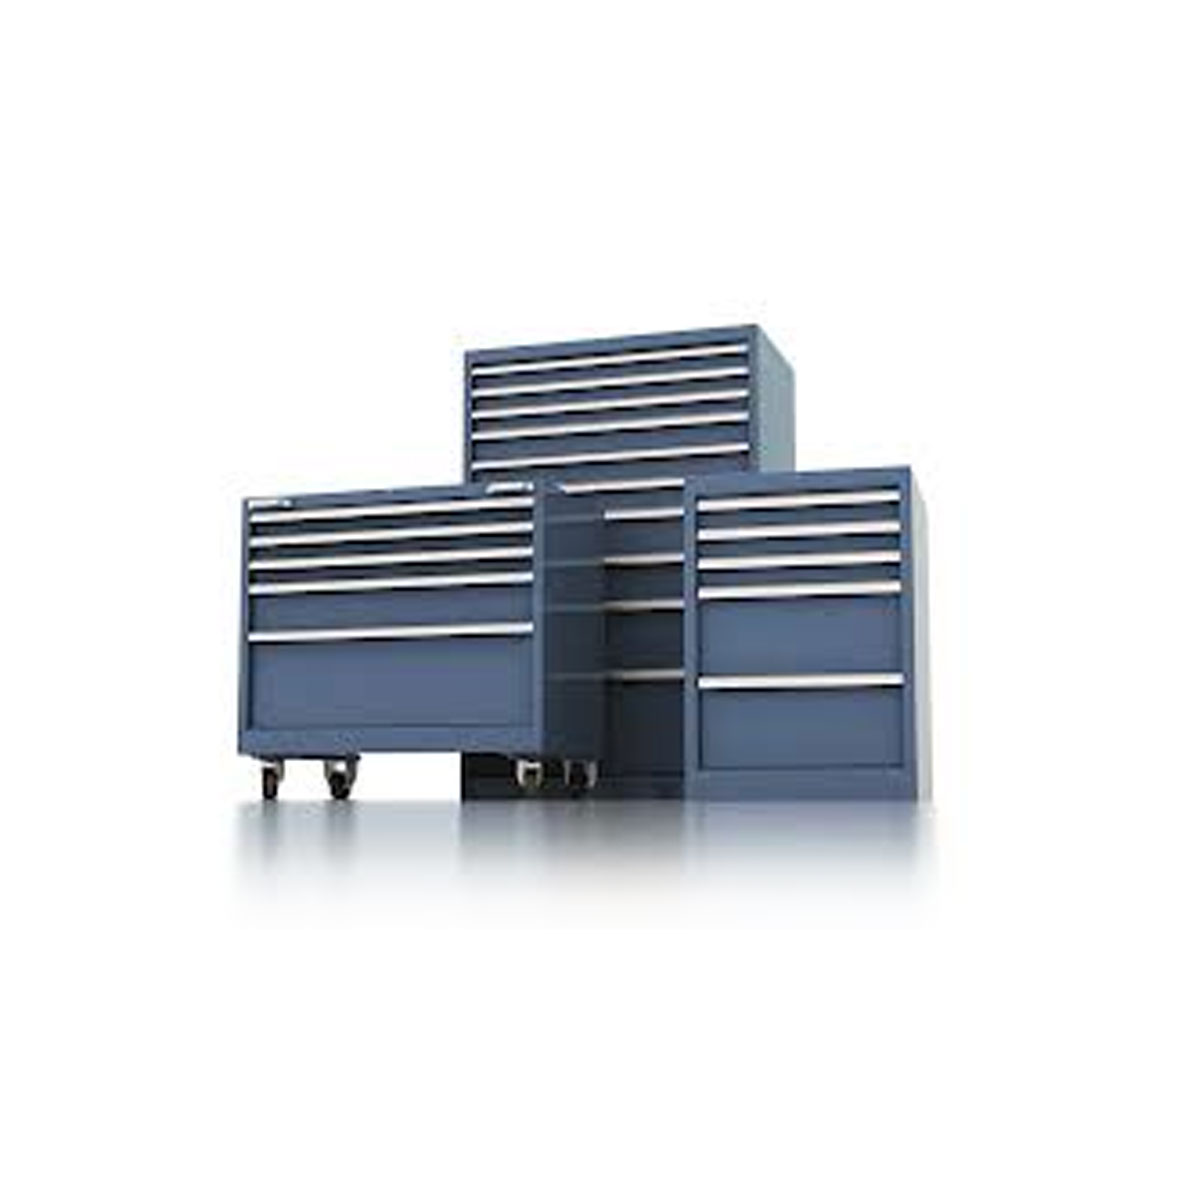 High Density Cabinets